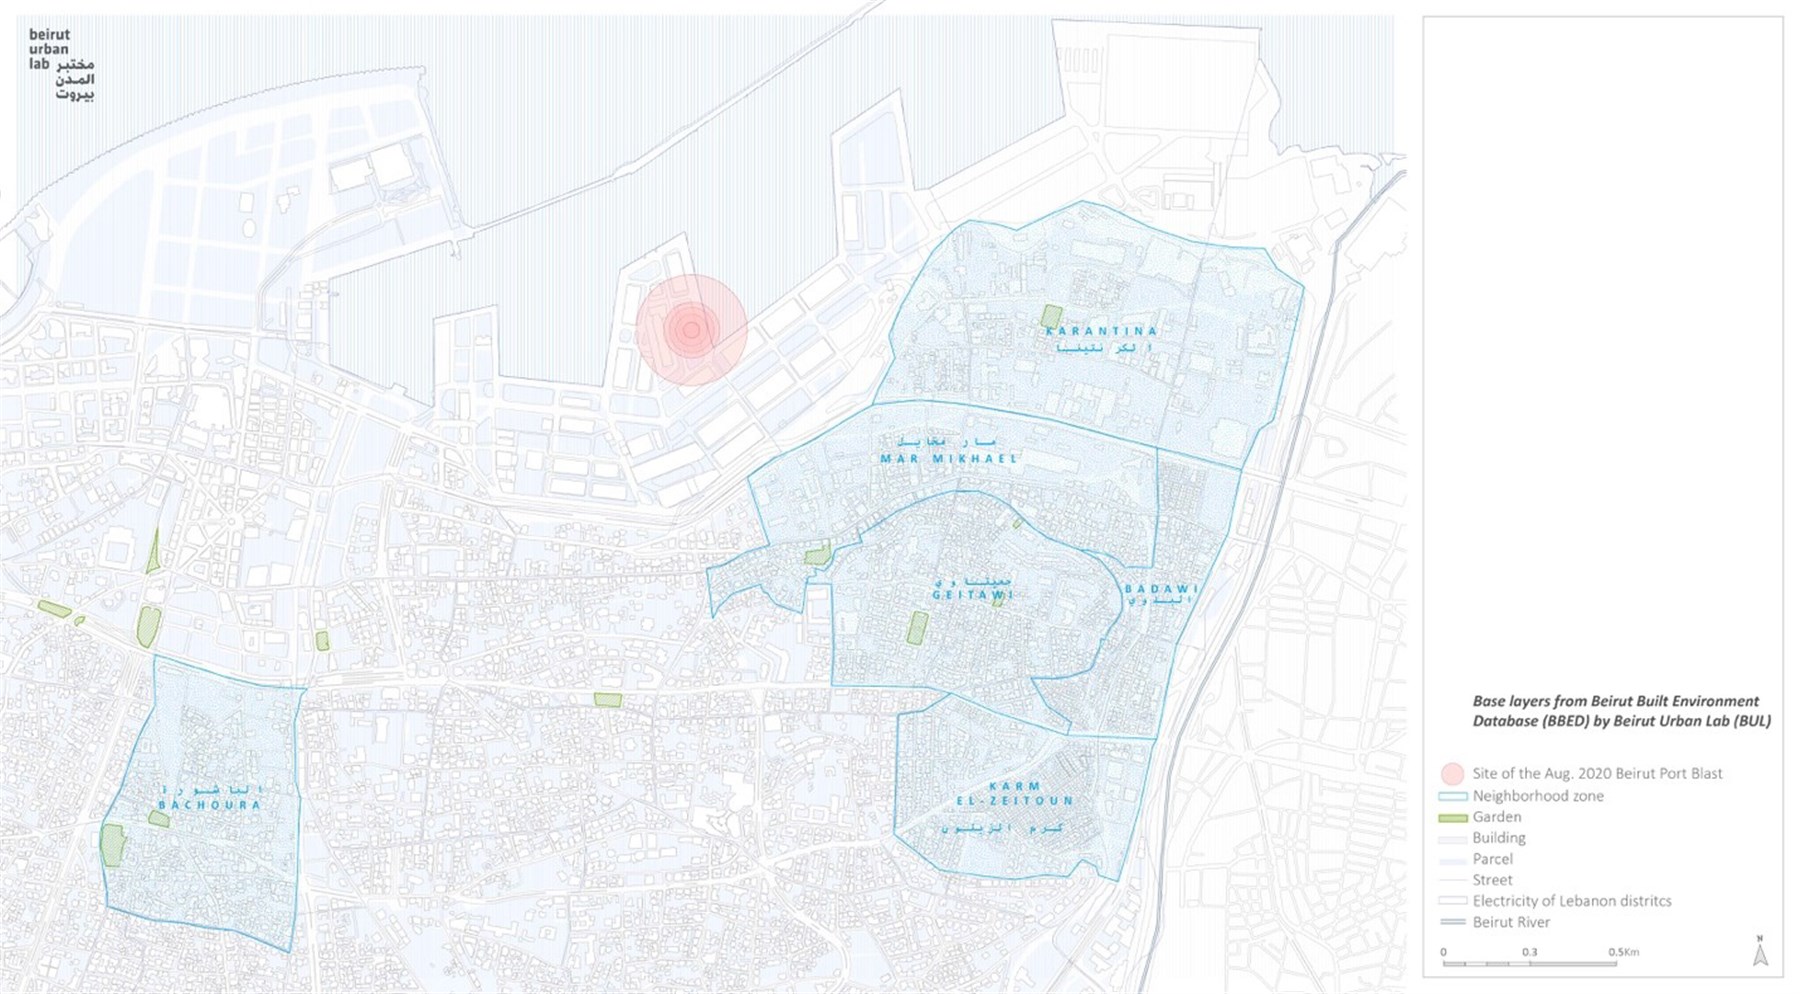 Map 1: Map showing zone limits in all neighborhoods. (Source: Beirut Urban Lab, 2020)